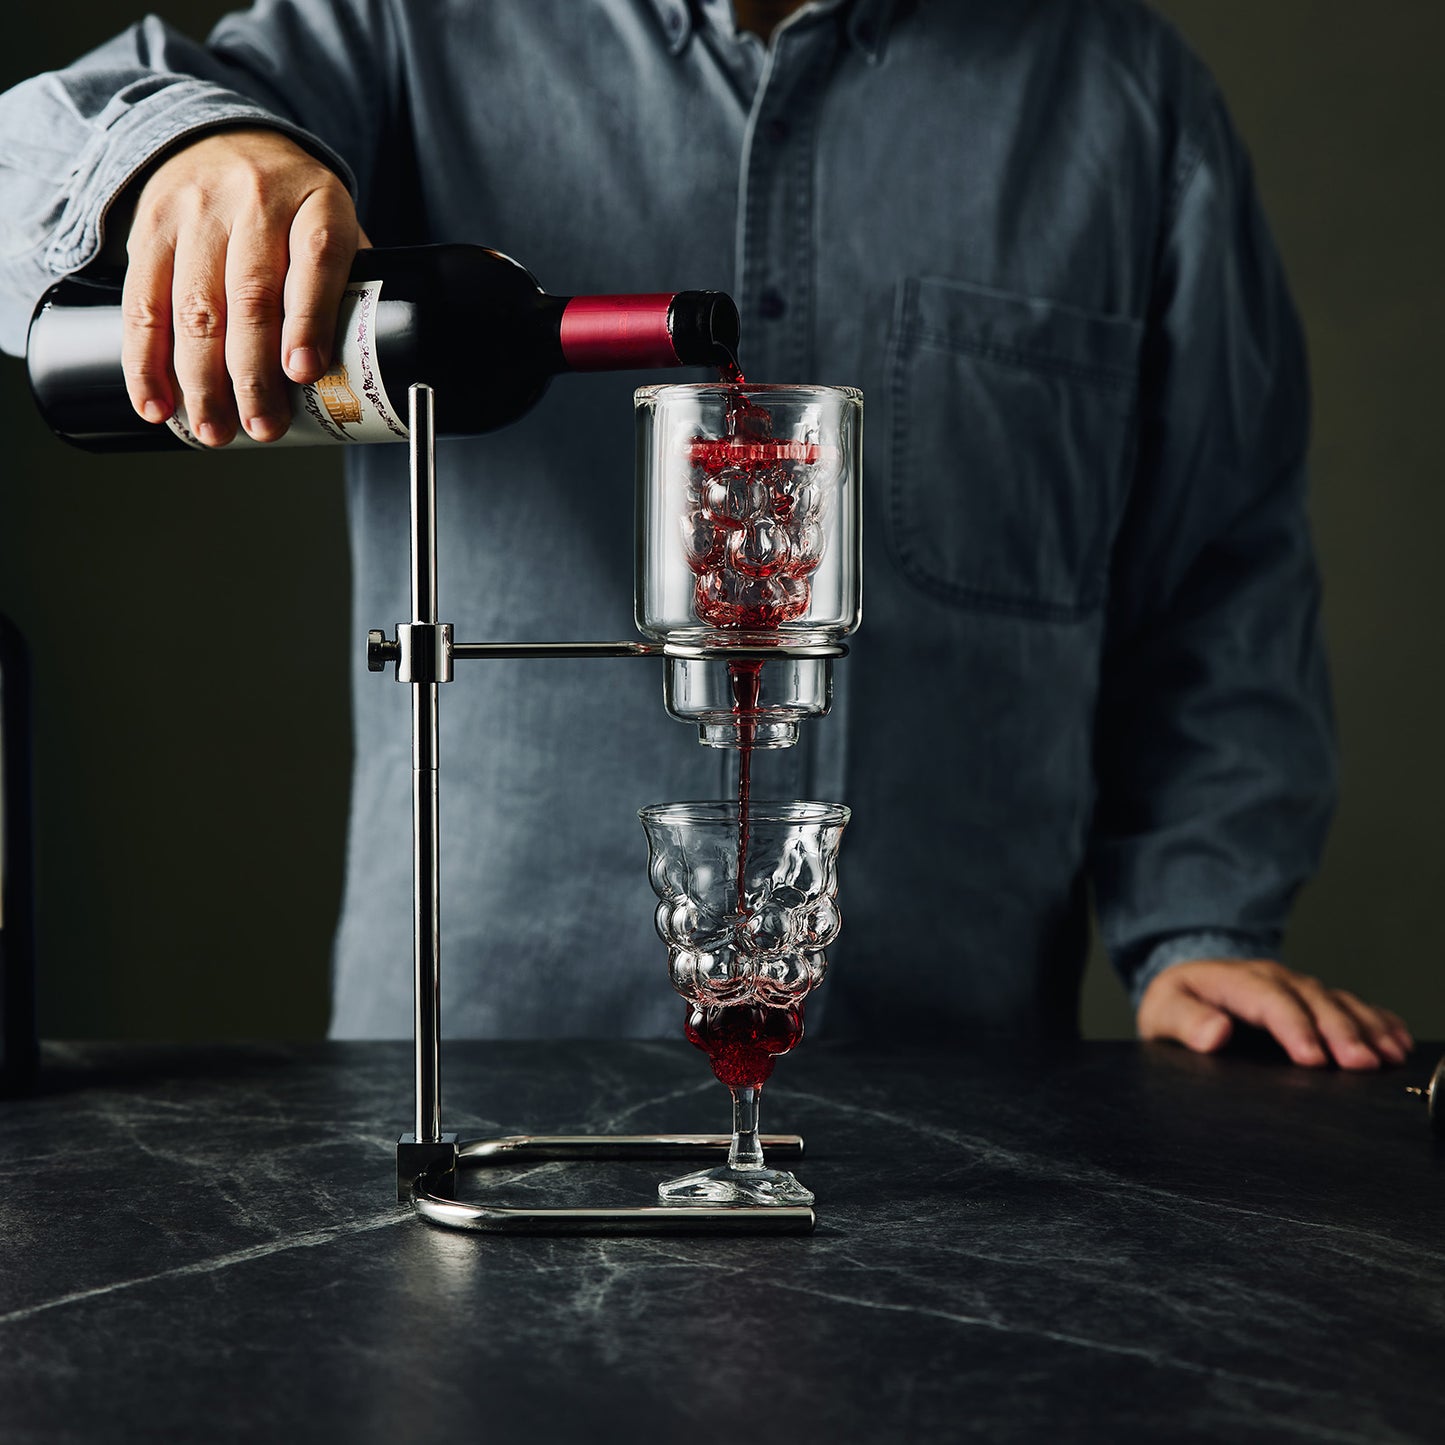 Dionysus Wine Aerator - Experience Set (3 pieces) - Best Set for Wine Tasting Experience!